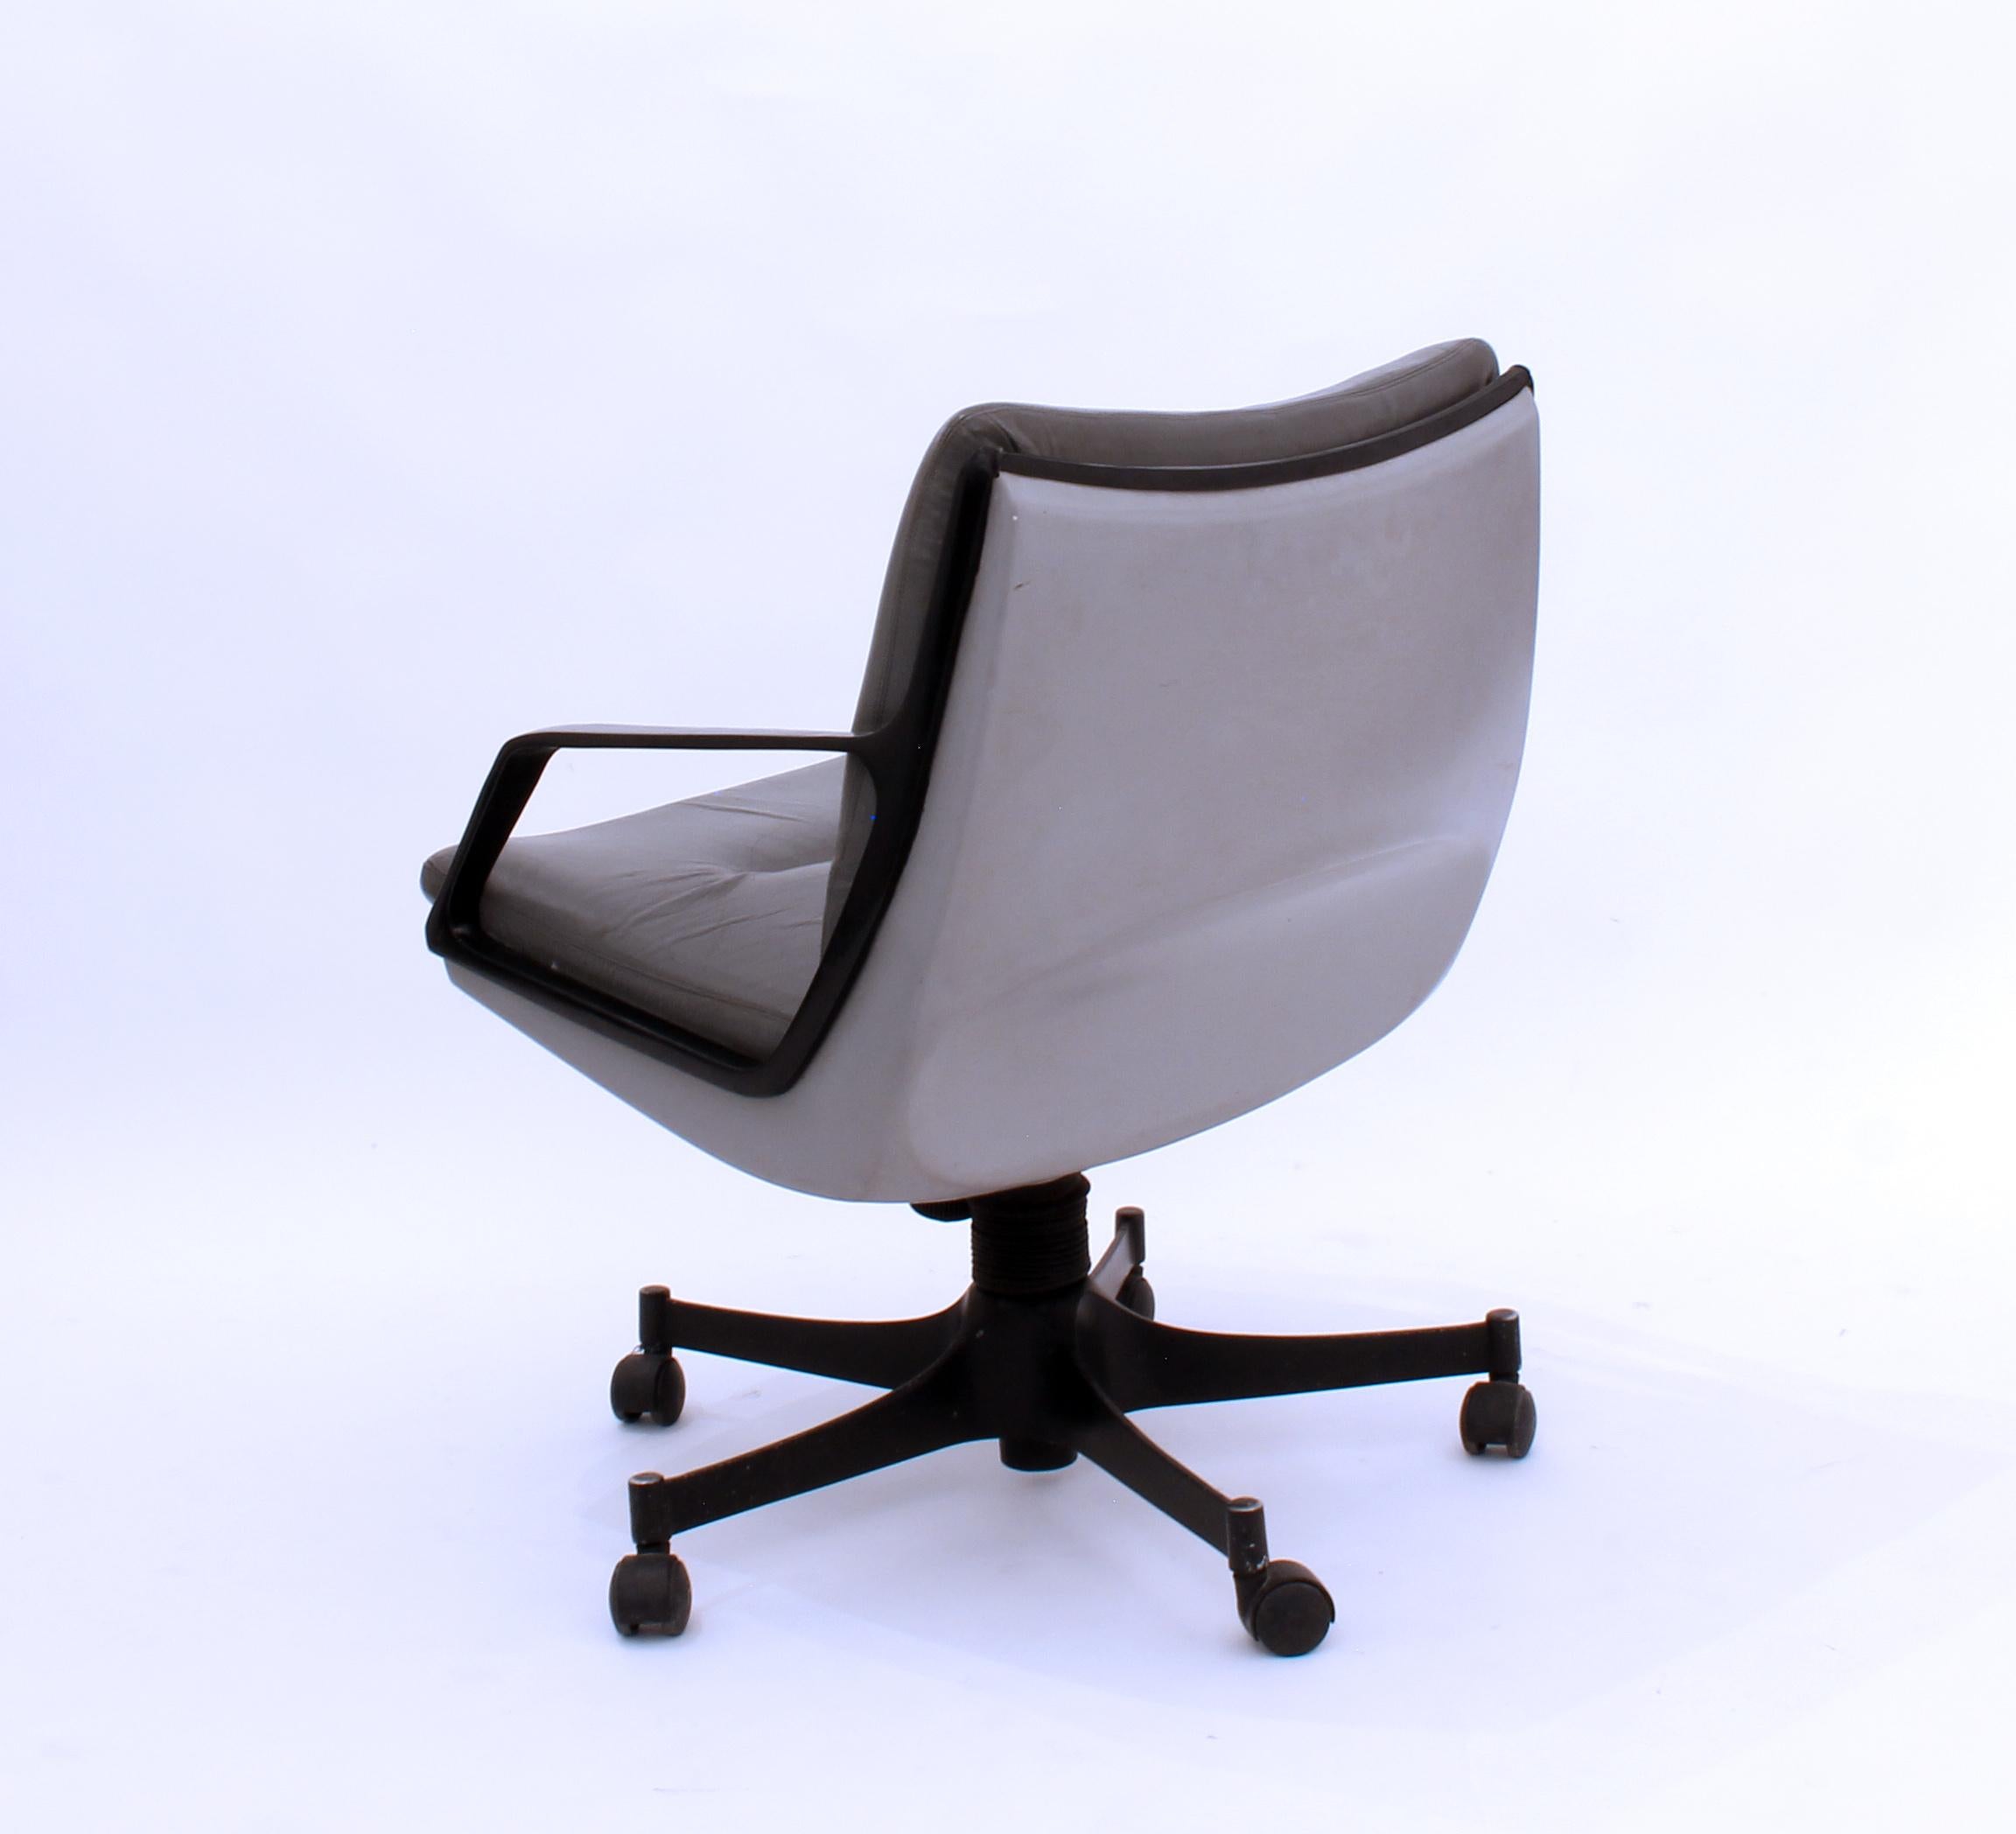 Handsome vintage Commander Chair designed by Brazilian master Jorge Zalsuzpin. Features a rare gray color way with leather, fiberglass, and aluminum materials. 